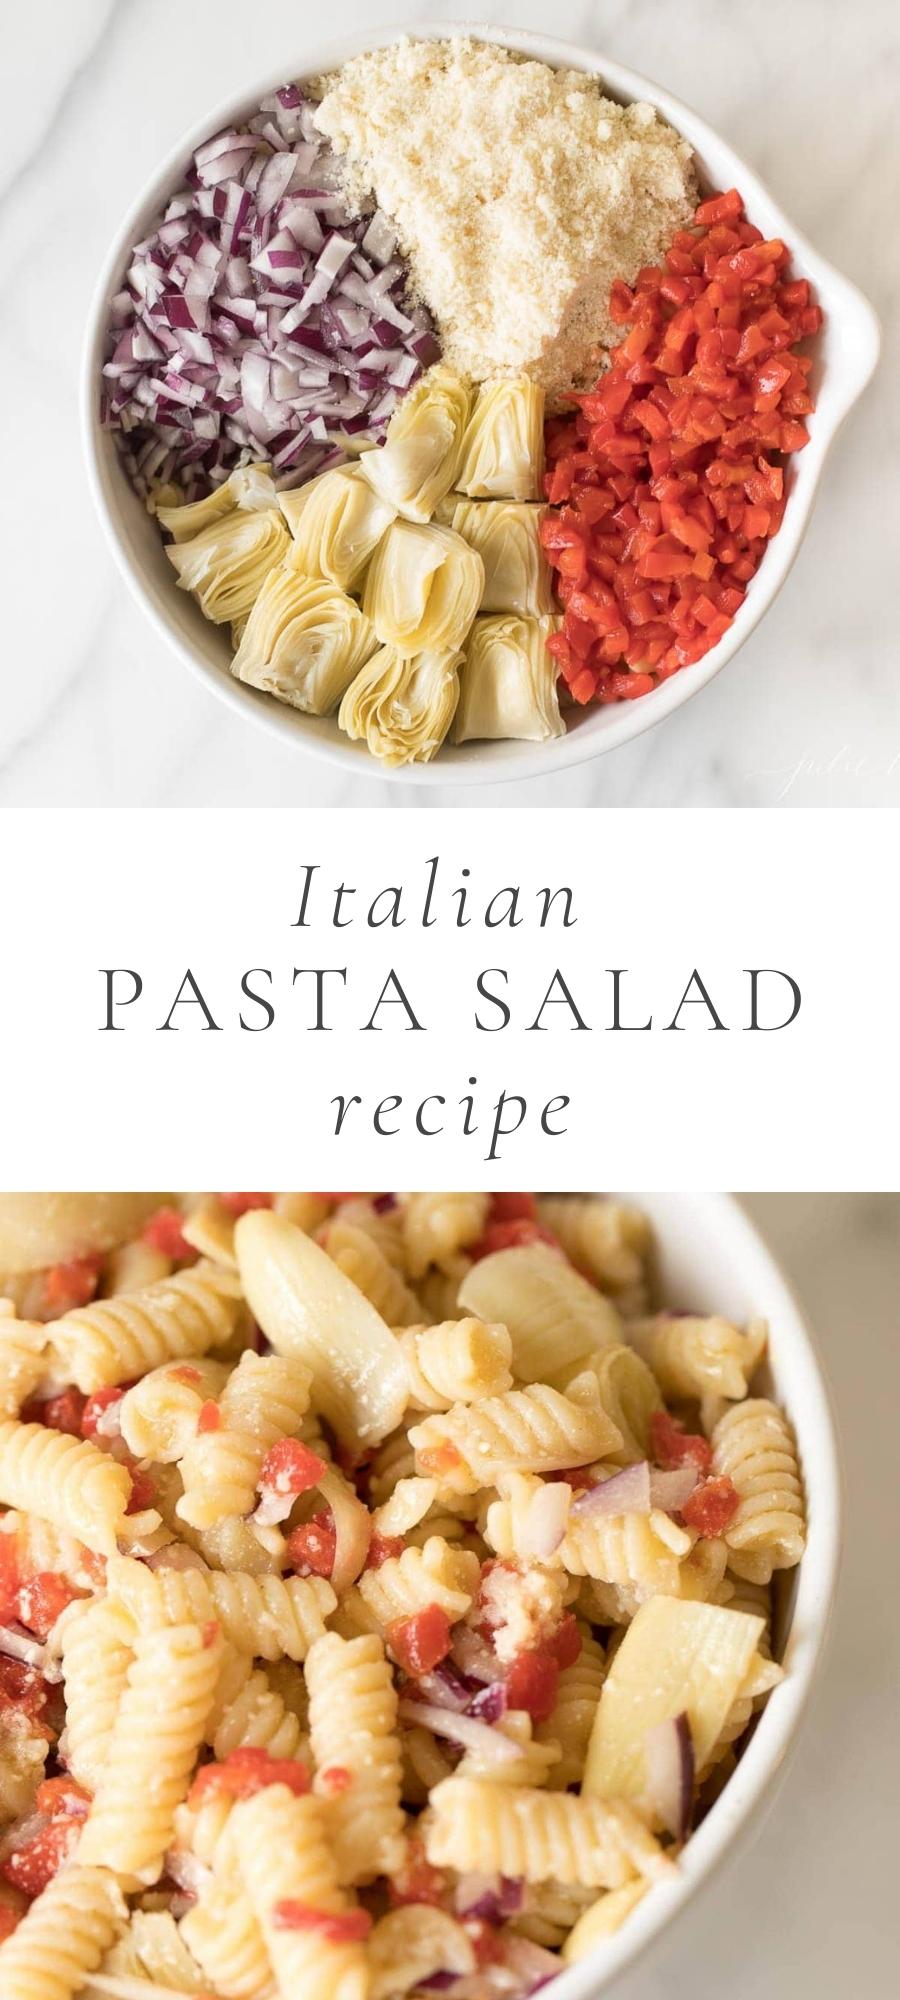 pasta salad in bowl with vegetables and pasta